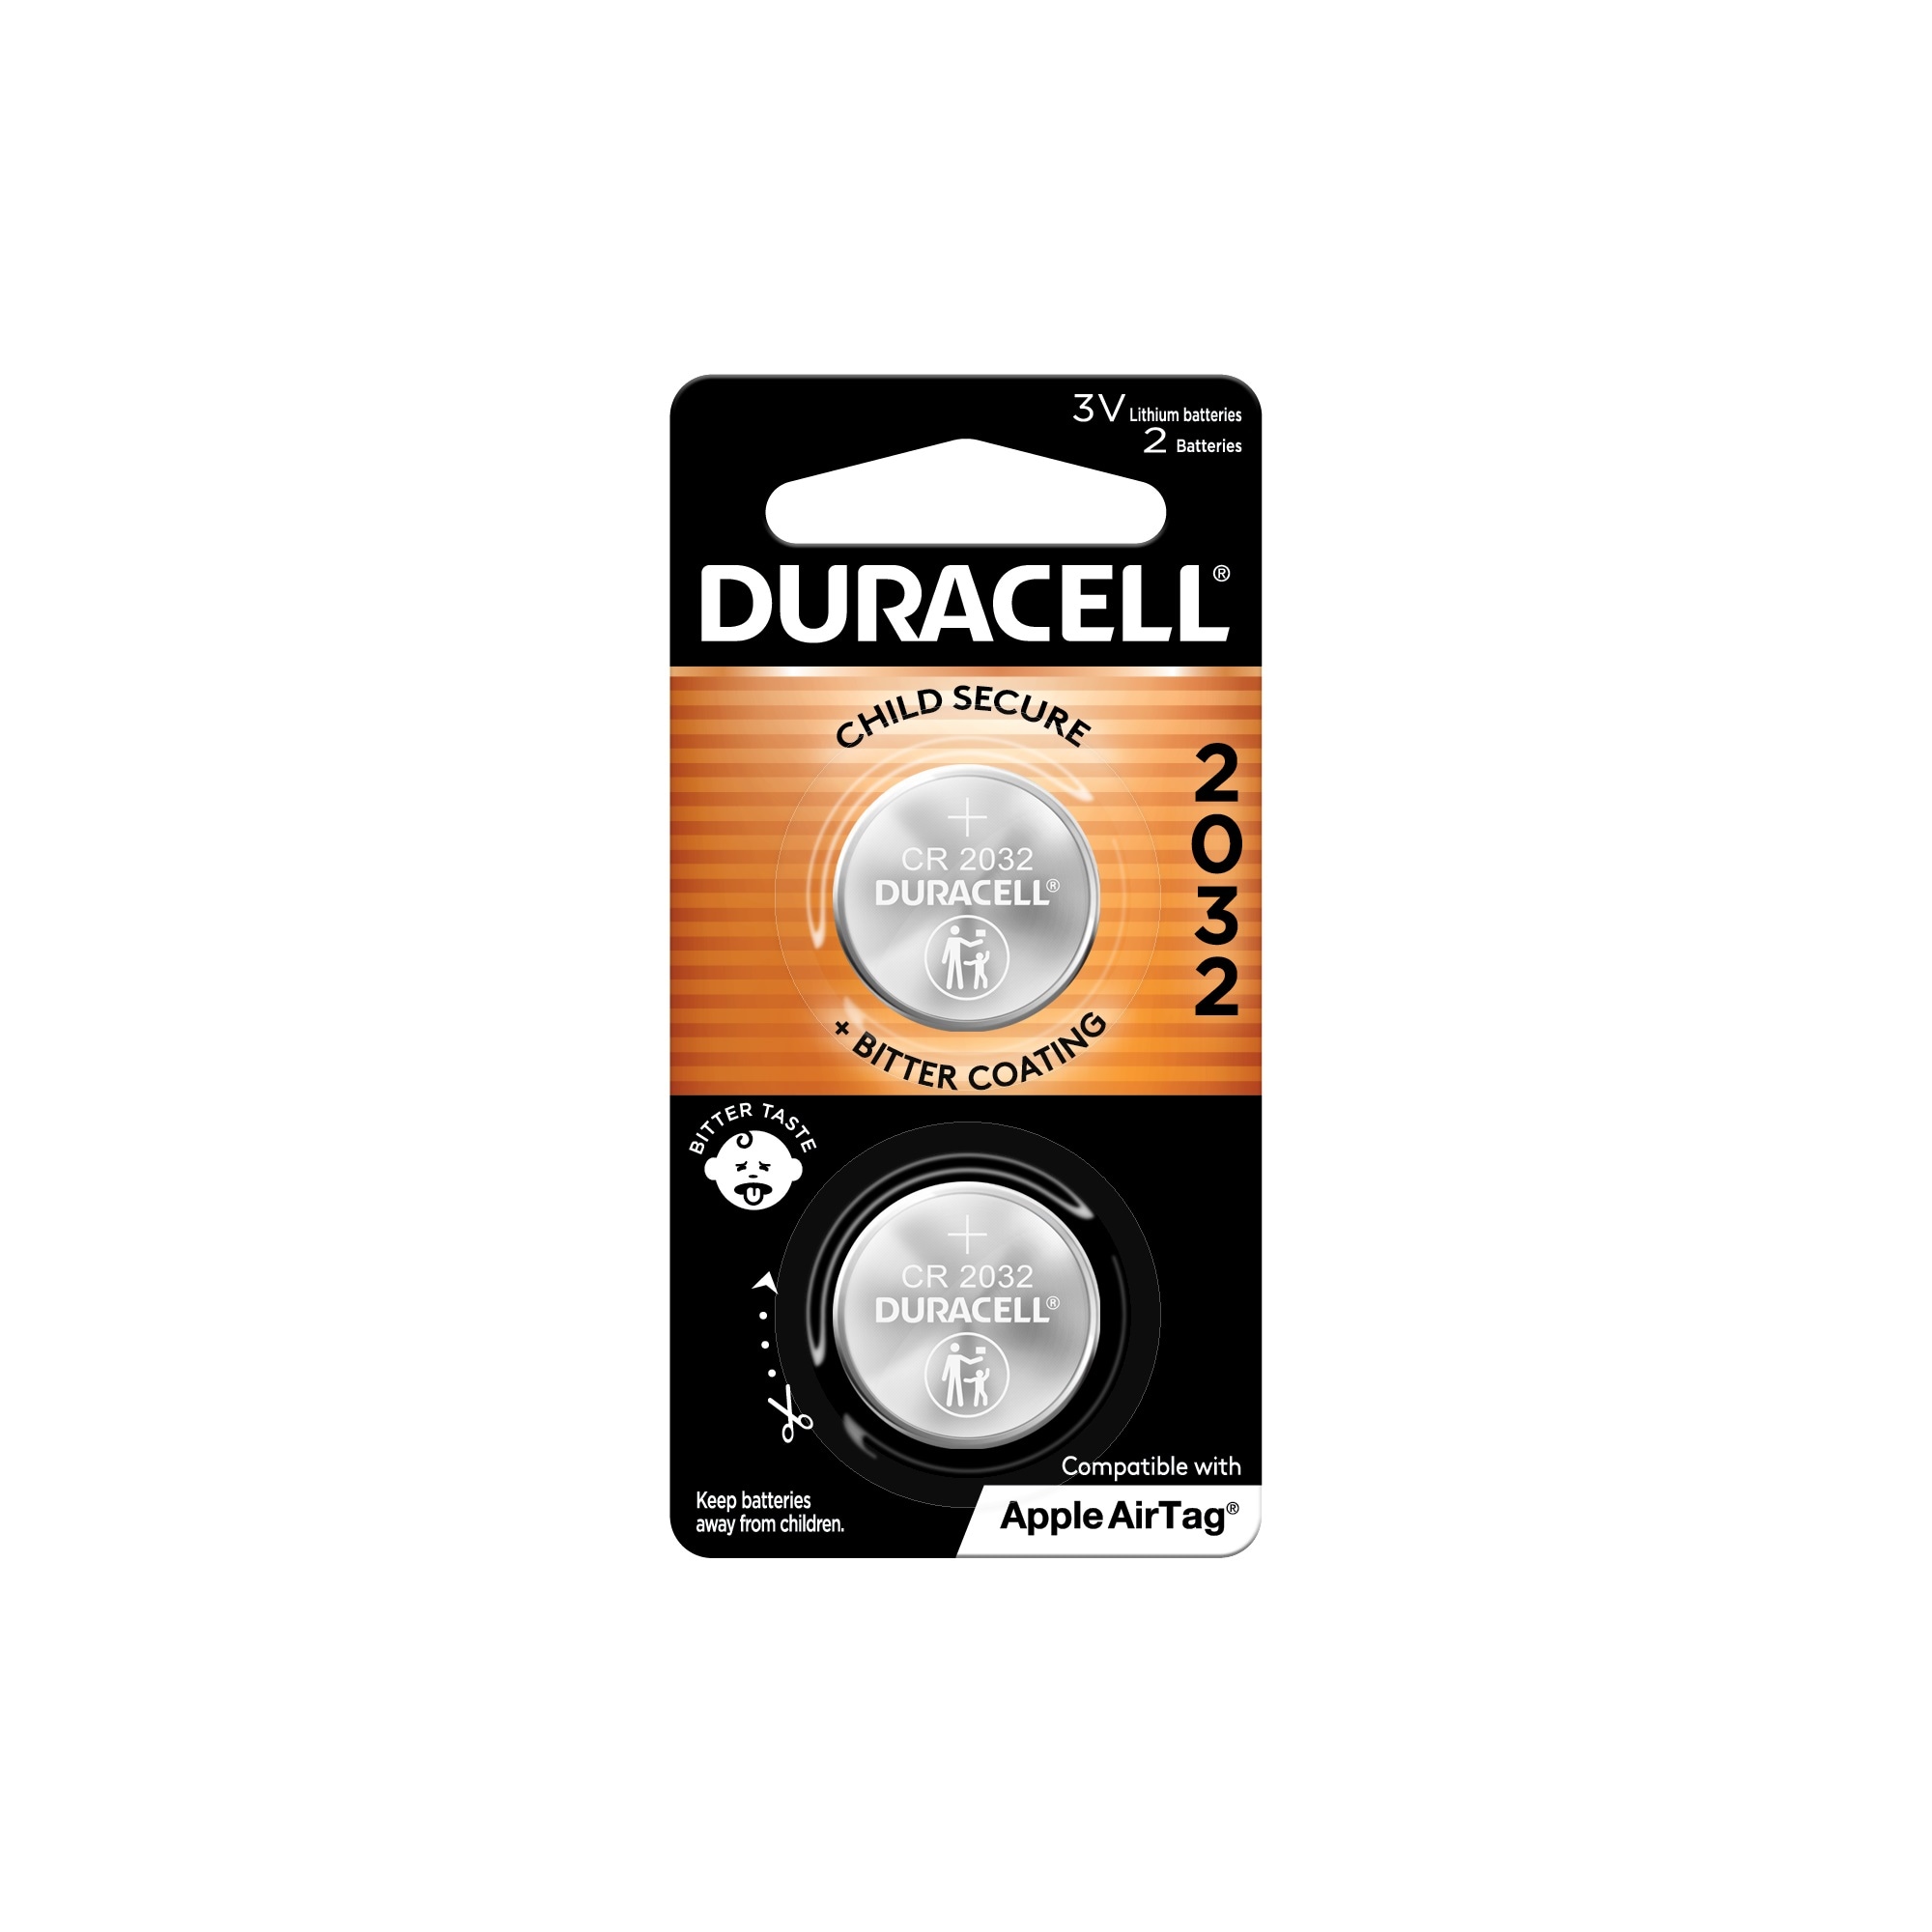 DURACELL CR2032 3V Lithium Battery, Child Safety Features, 2 Count Pack,  Lithium Coin Battery for Key Fob, Car Remote, Glucose Monitor, CR Lithium 3